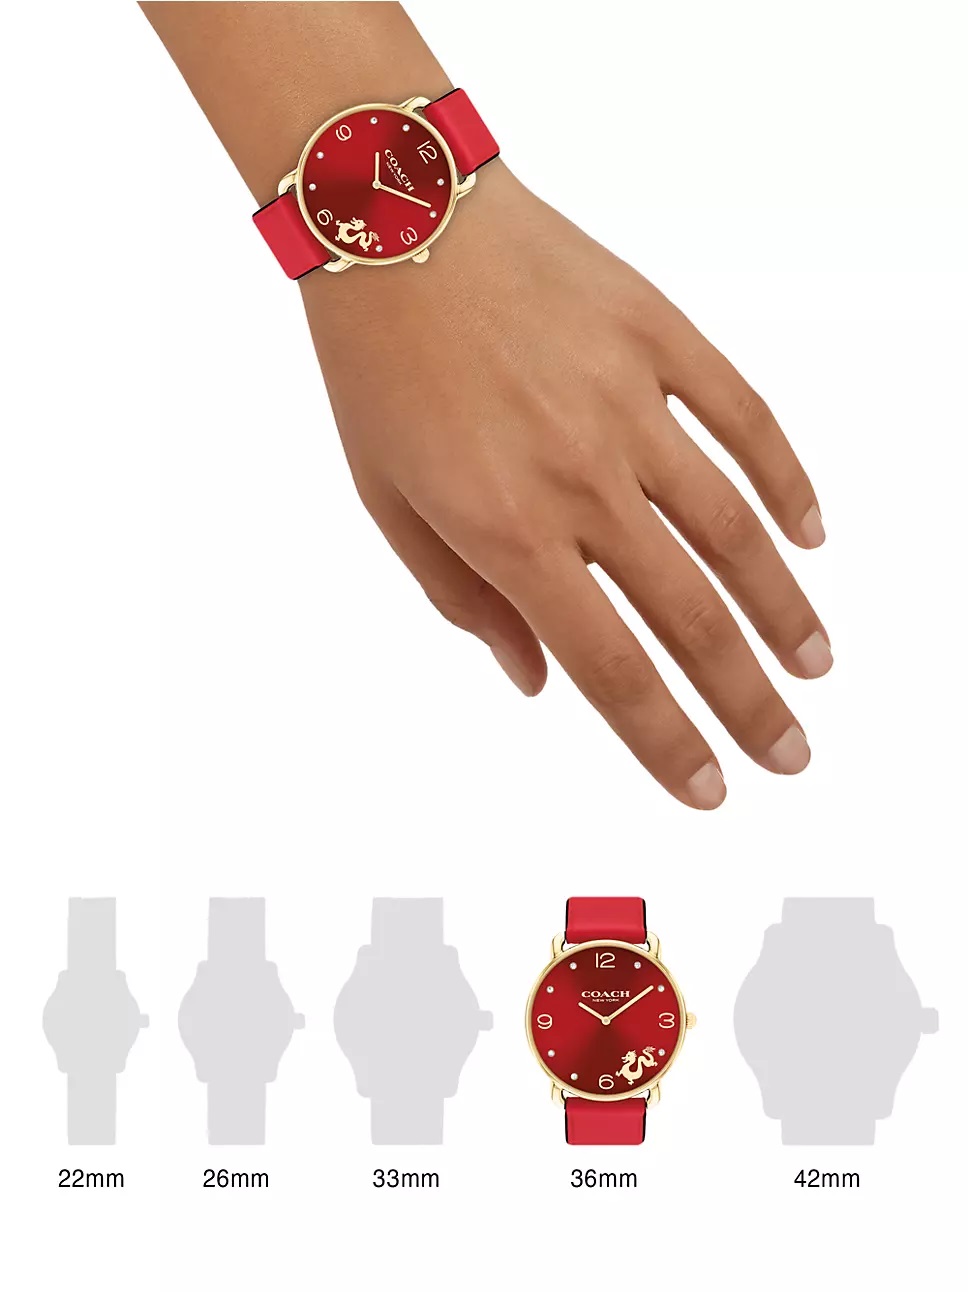 ĐỒNG HỒ NỮ COACH ELLIOT RED LEATHER ANALOG WOMEN WATCH CO-14504249 6